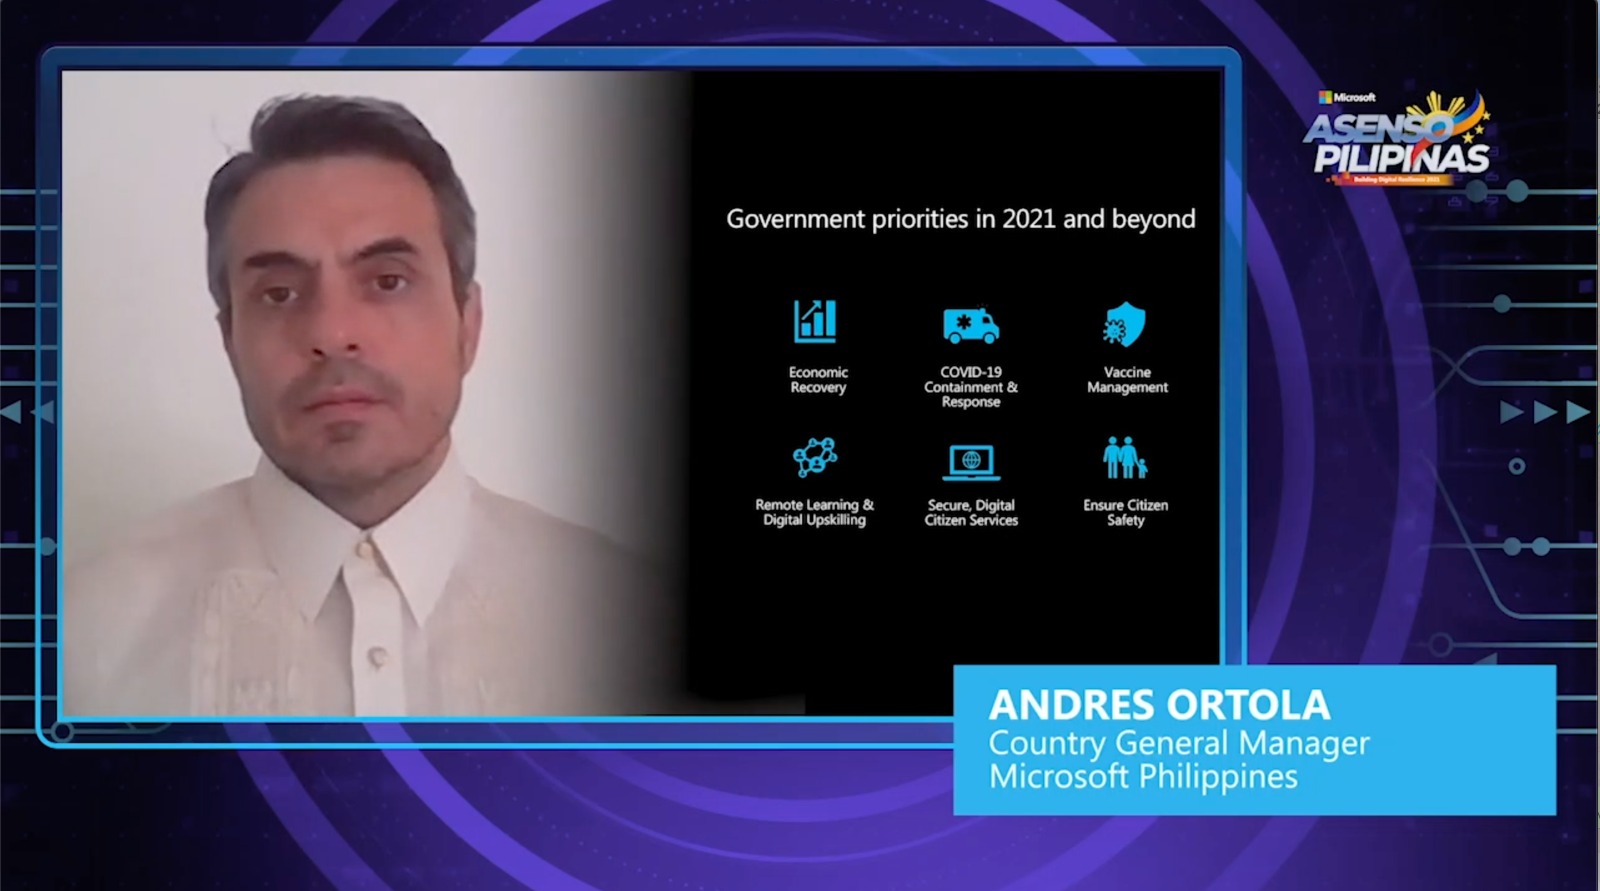 Microsoft Philippines Country General Manager